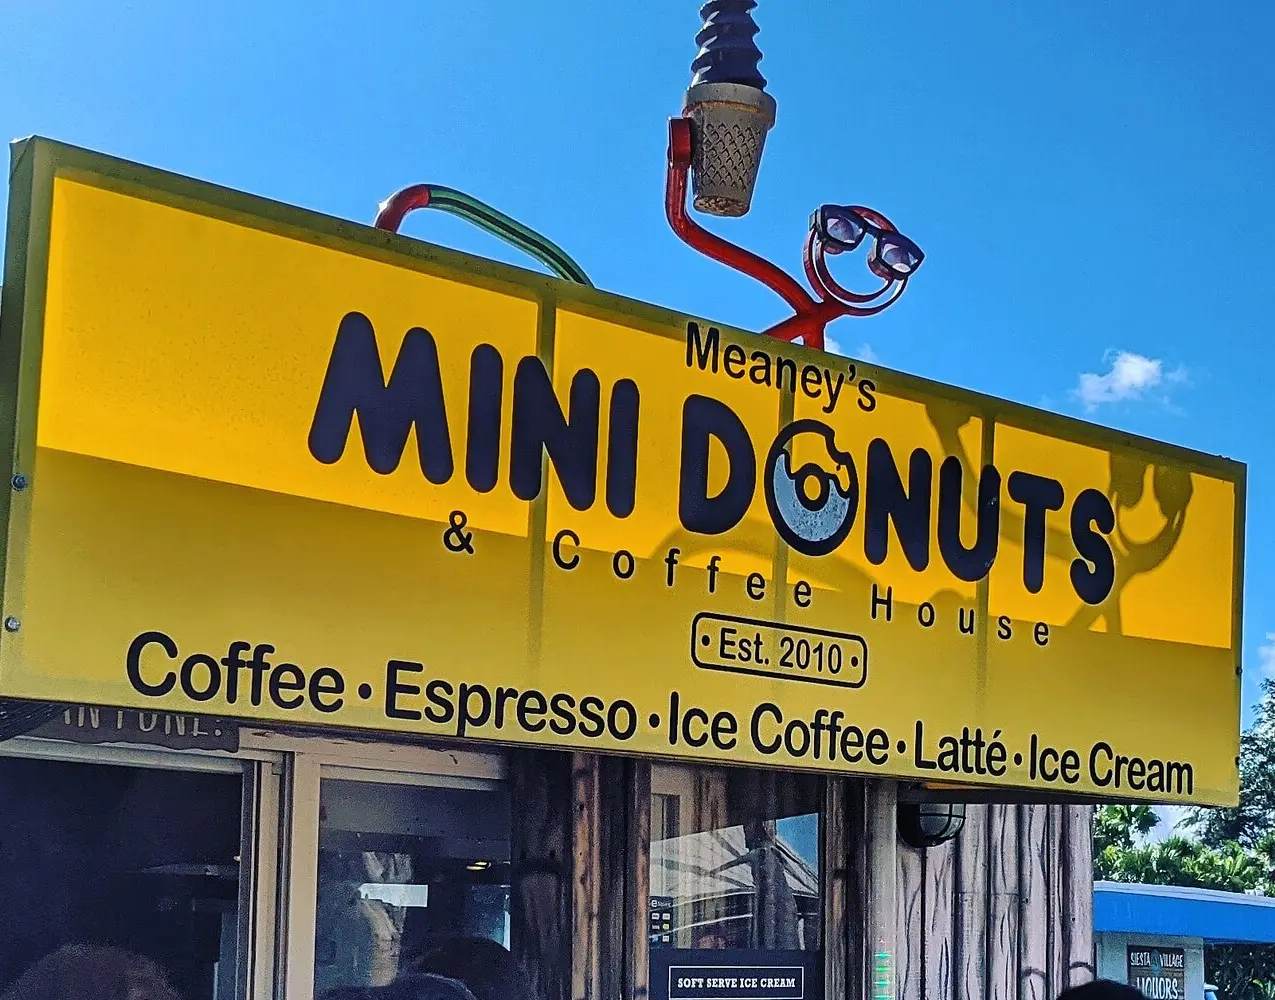 The Sweet Side of Siesta Key: Meaney's Mini Donuts & Coffee House